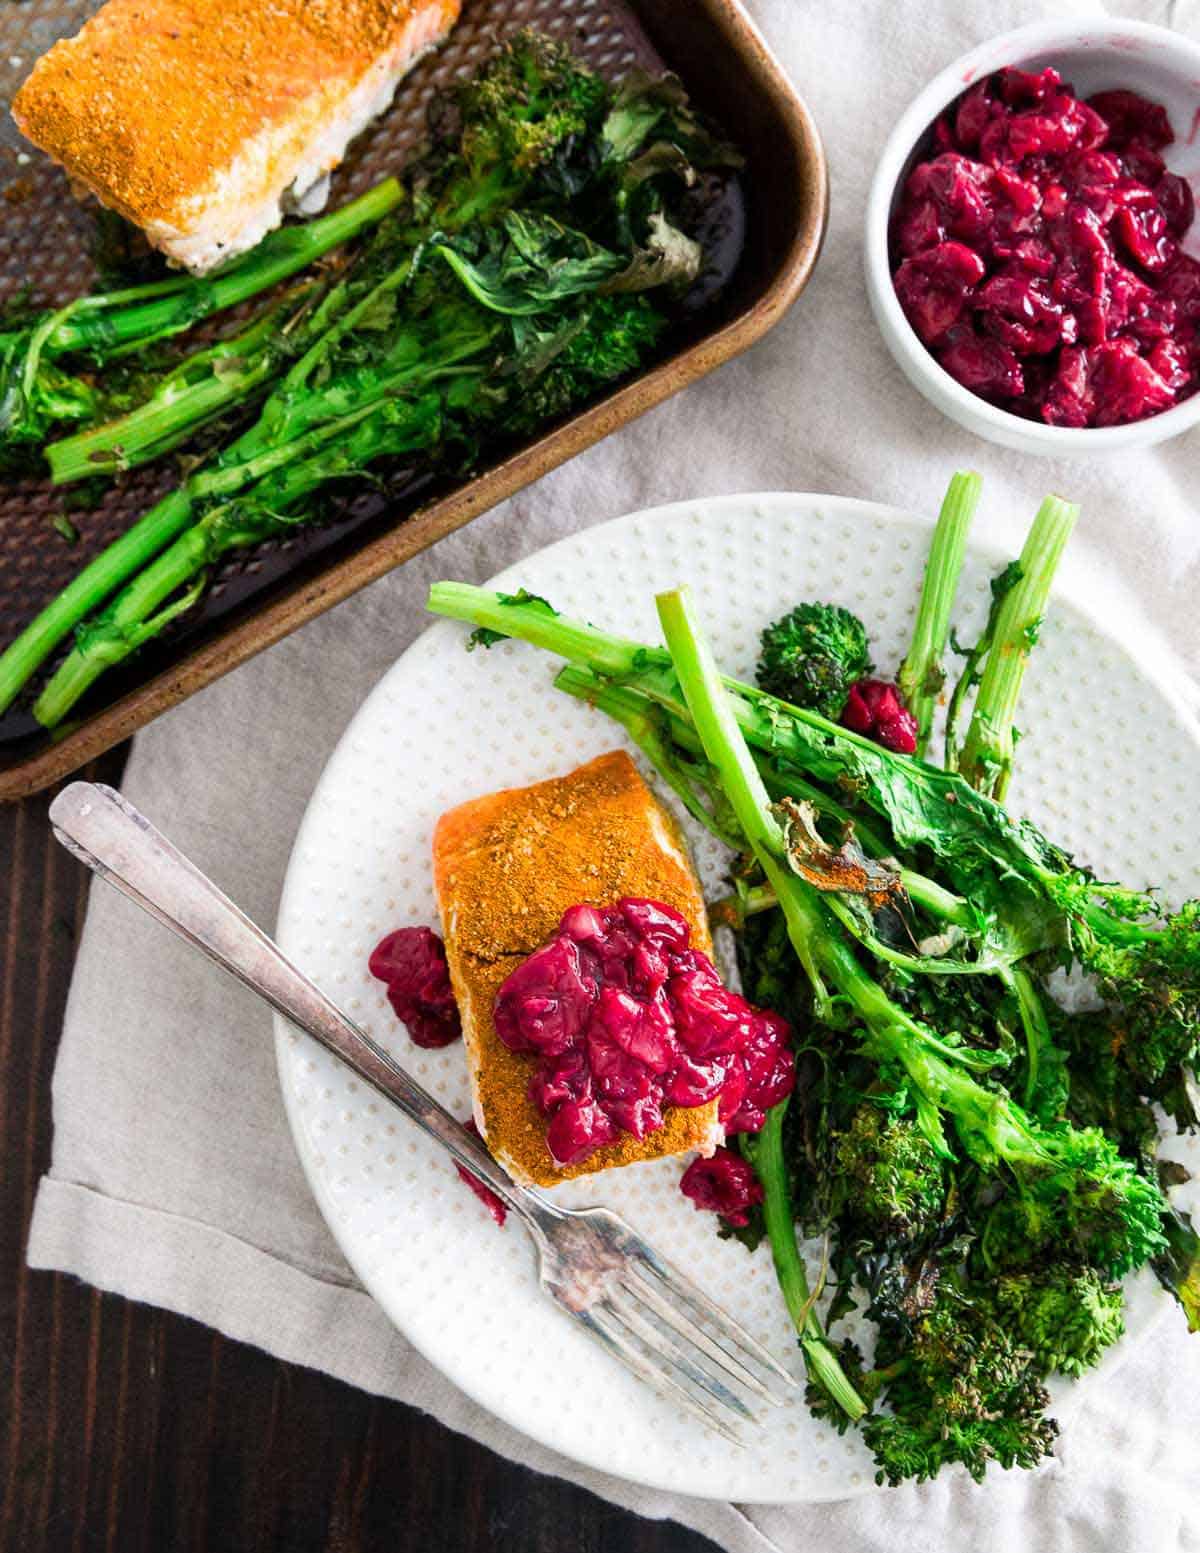 This sheet pan turmeric salmon with a quick garlic cherry sauce and roasted broccoli is a wholesome, healthy and anti-inflammatory dinner recipe that's super easy to put together.